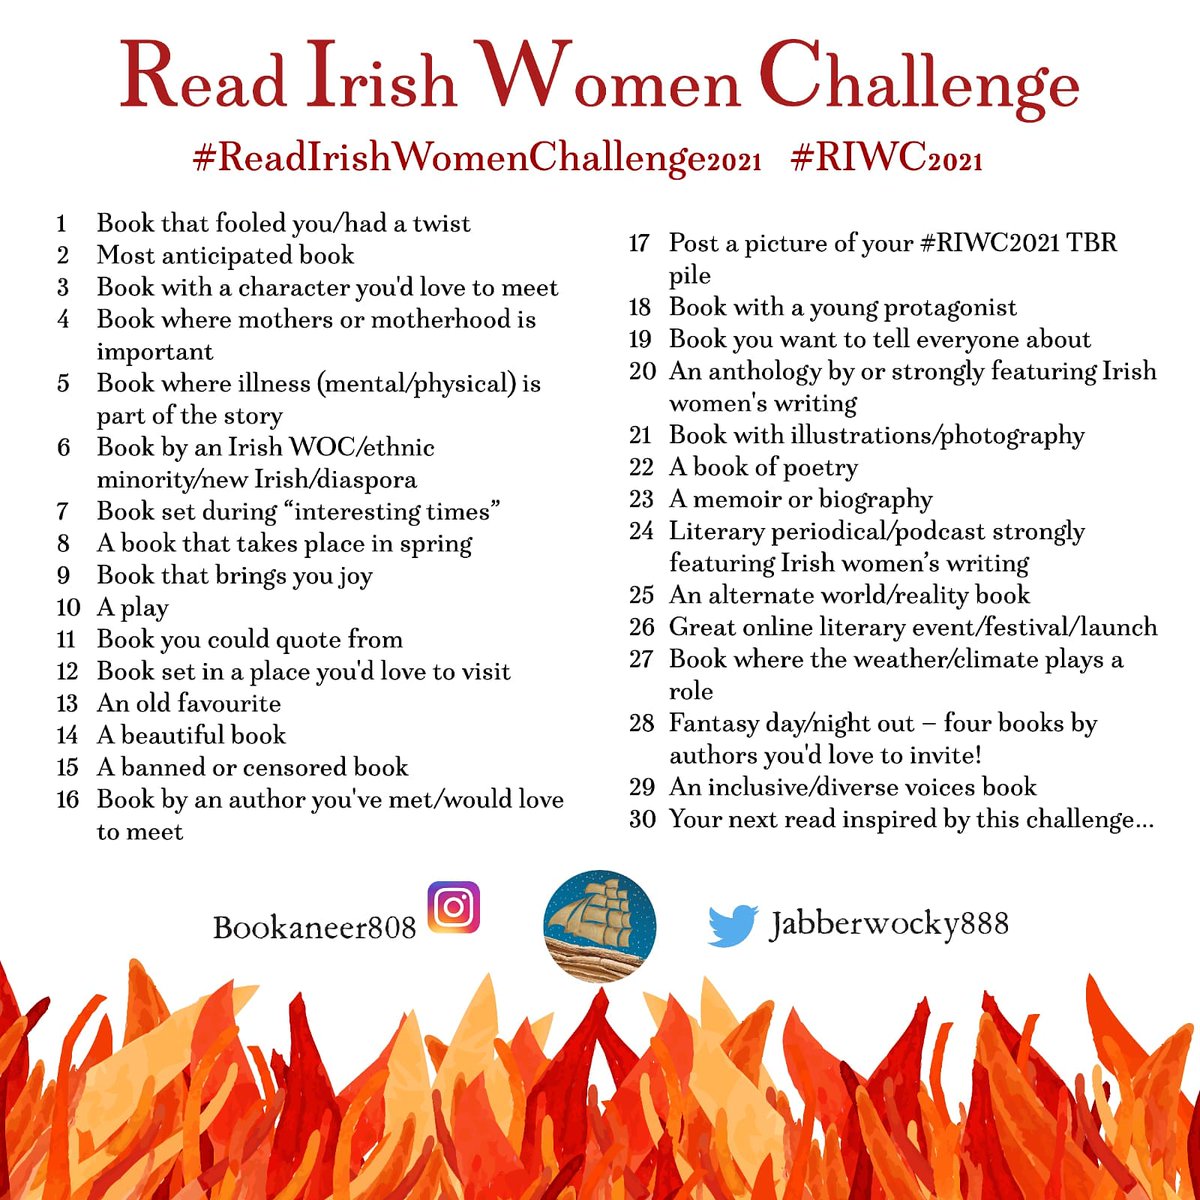 Day 13 of the  #ReadIrishWomenChallenge2021: an old favouriteThe Blue Horse by Marita Conlon-McKenna (illustrated by Donald Teskey)A story of a young girl from the Traveller community: Katie's whole world is turned upside down when her family's home is destroyed by fire.